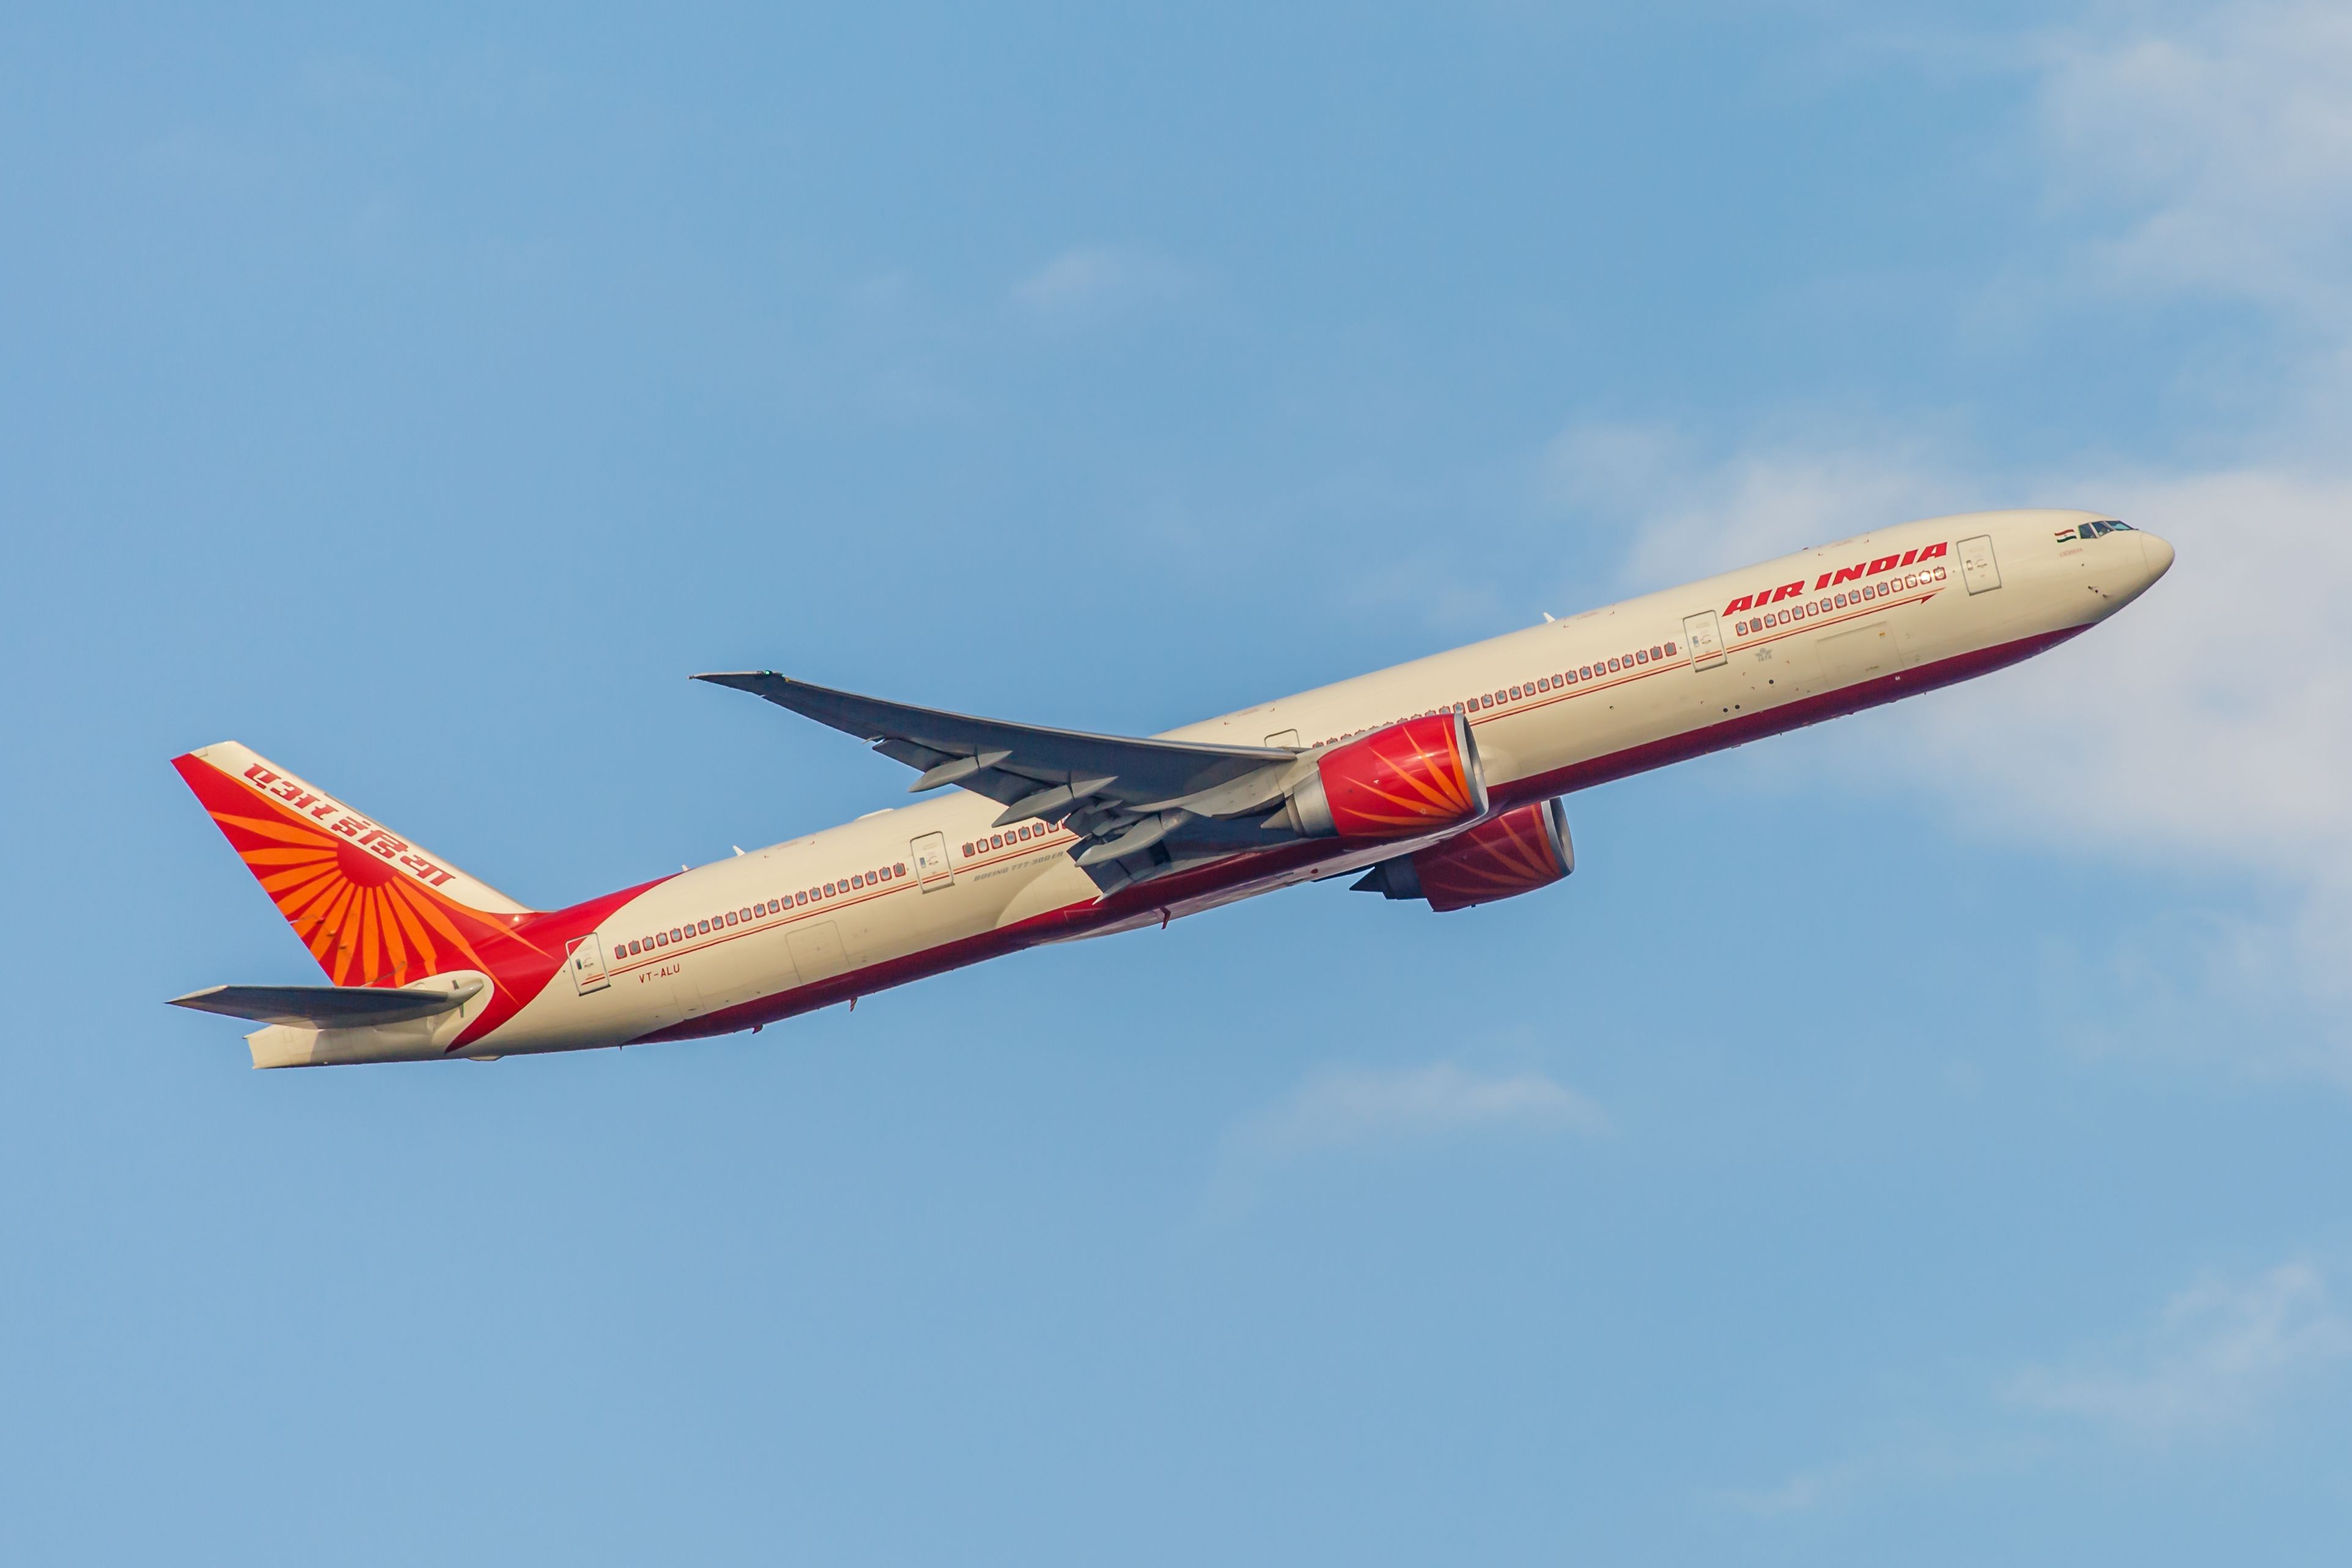 Air India 777 Taking Off